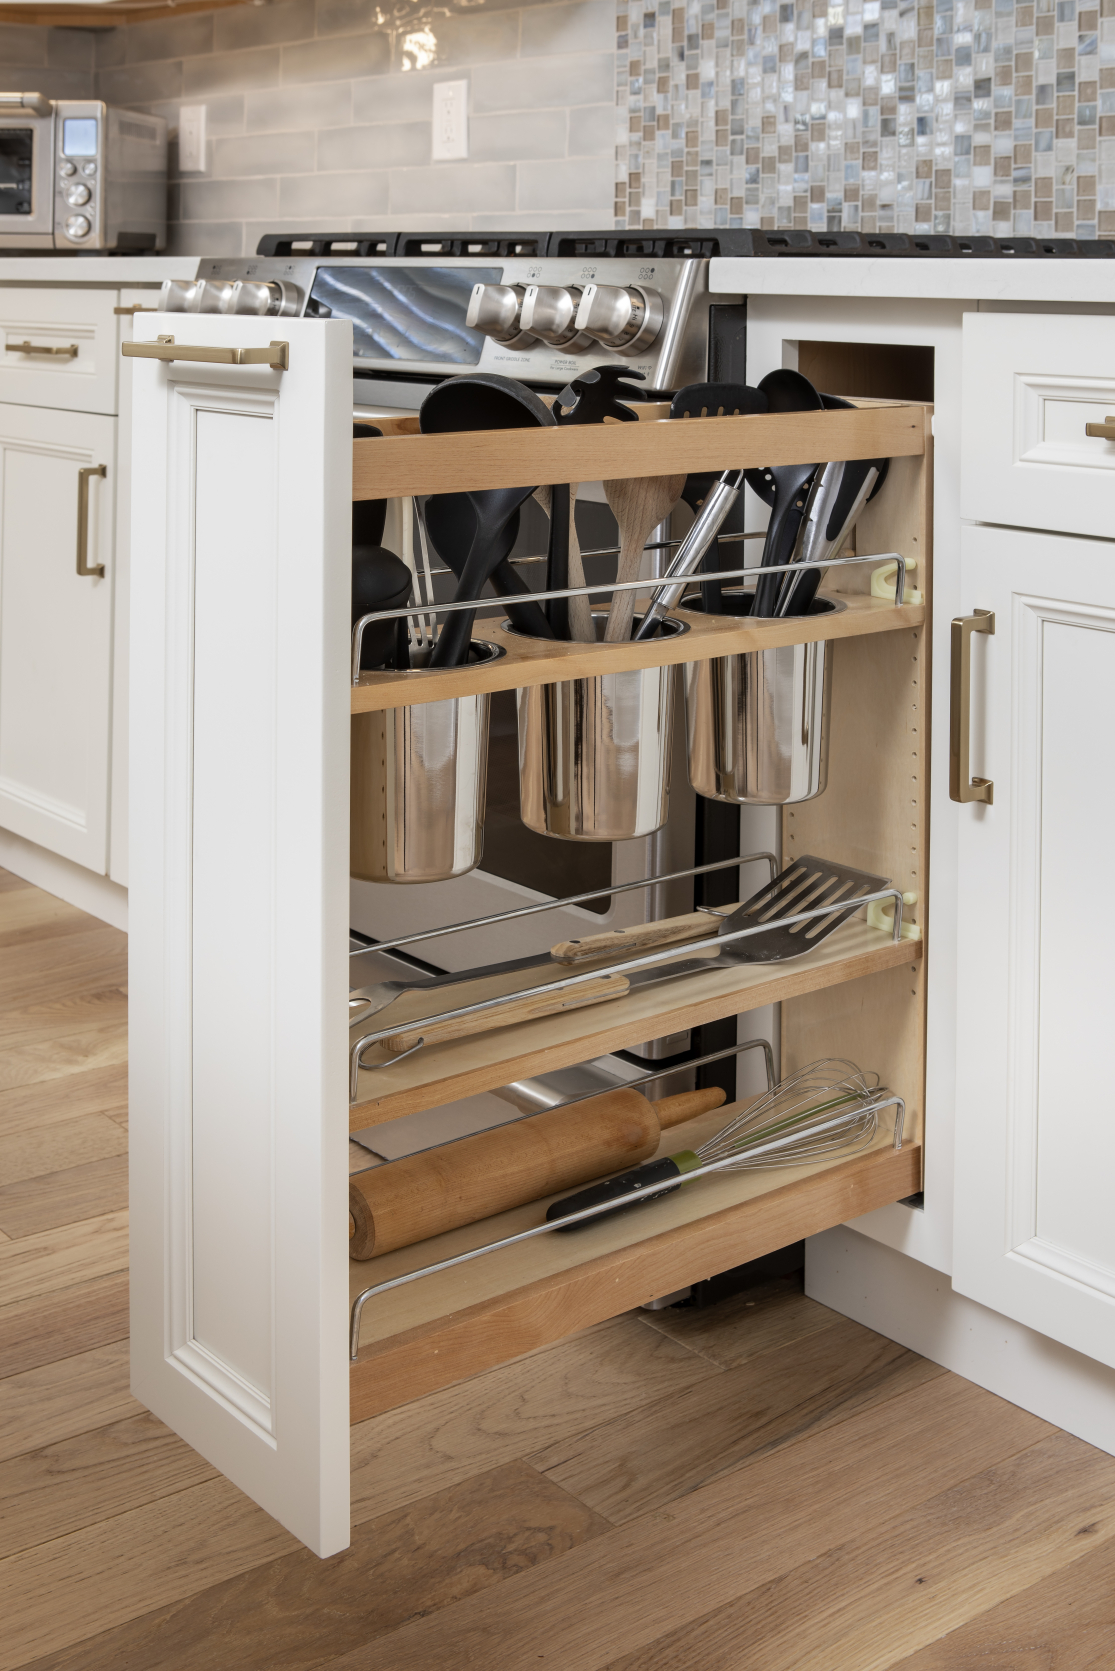 The Kitchen Cabinet Drawer Discussion